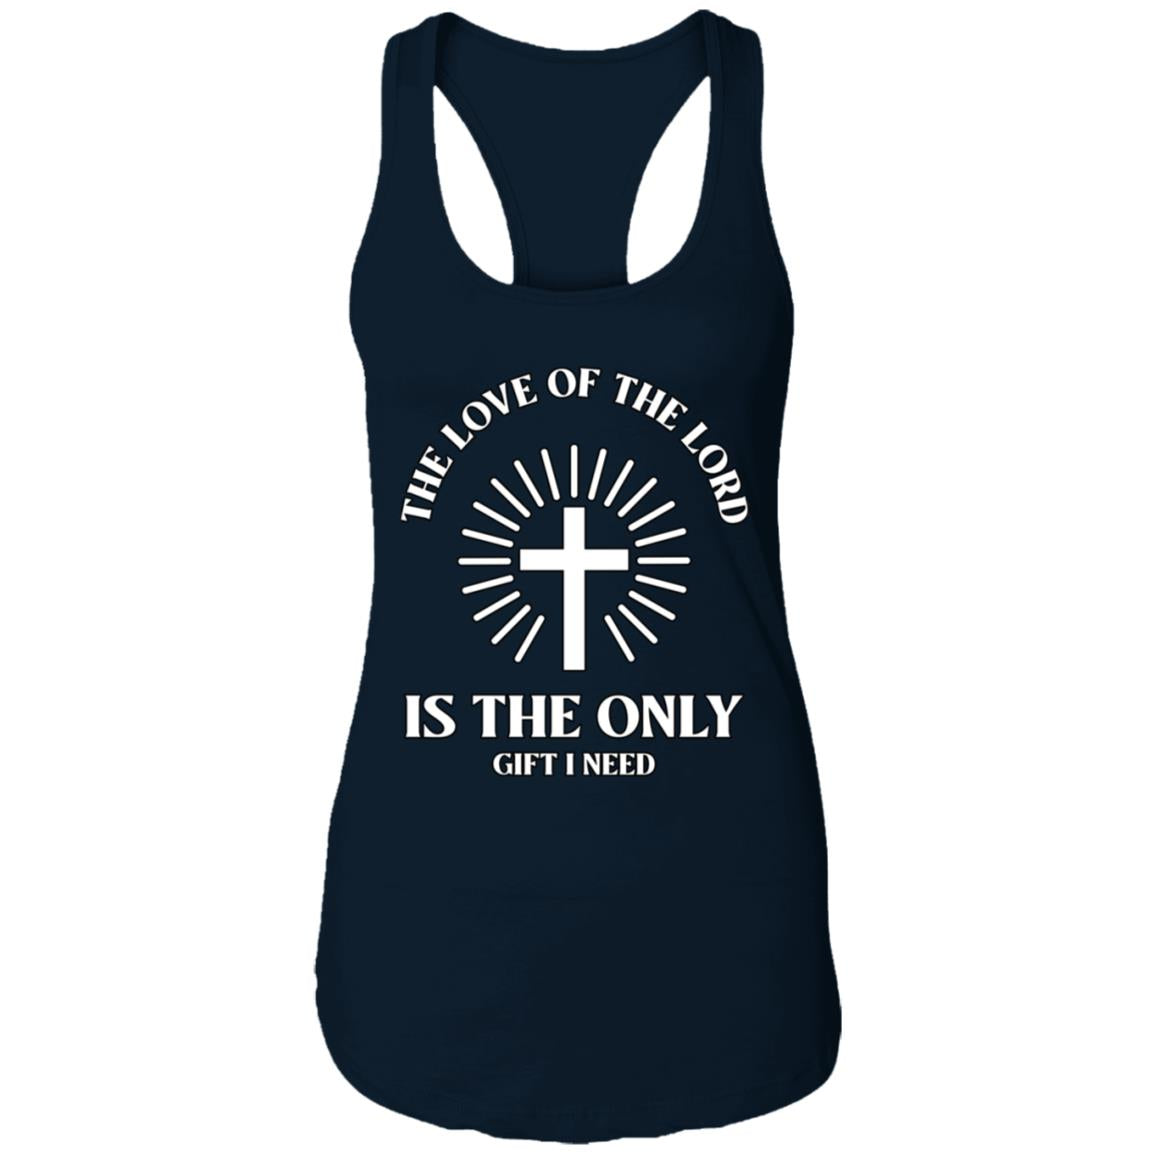 Love of the Lord (Mens & Womens Tank)